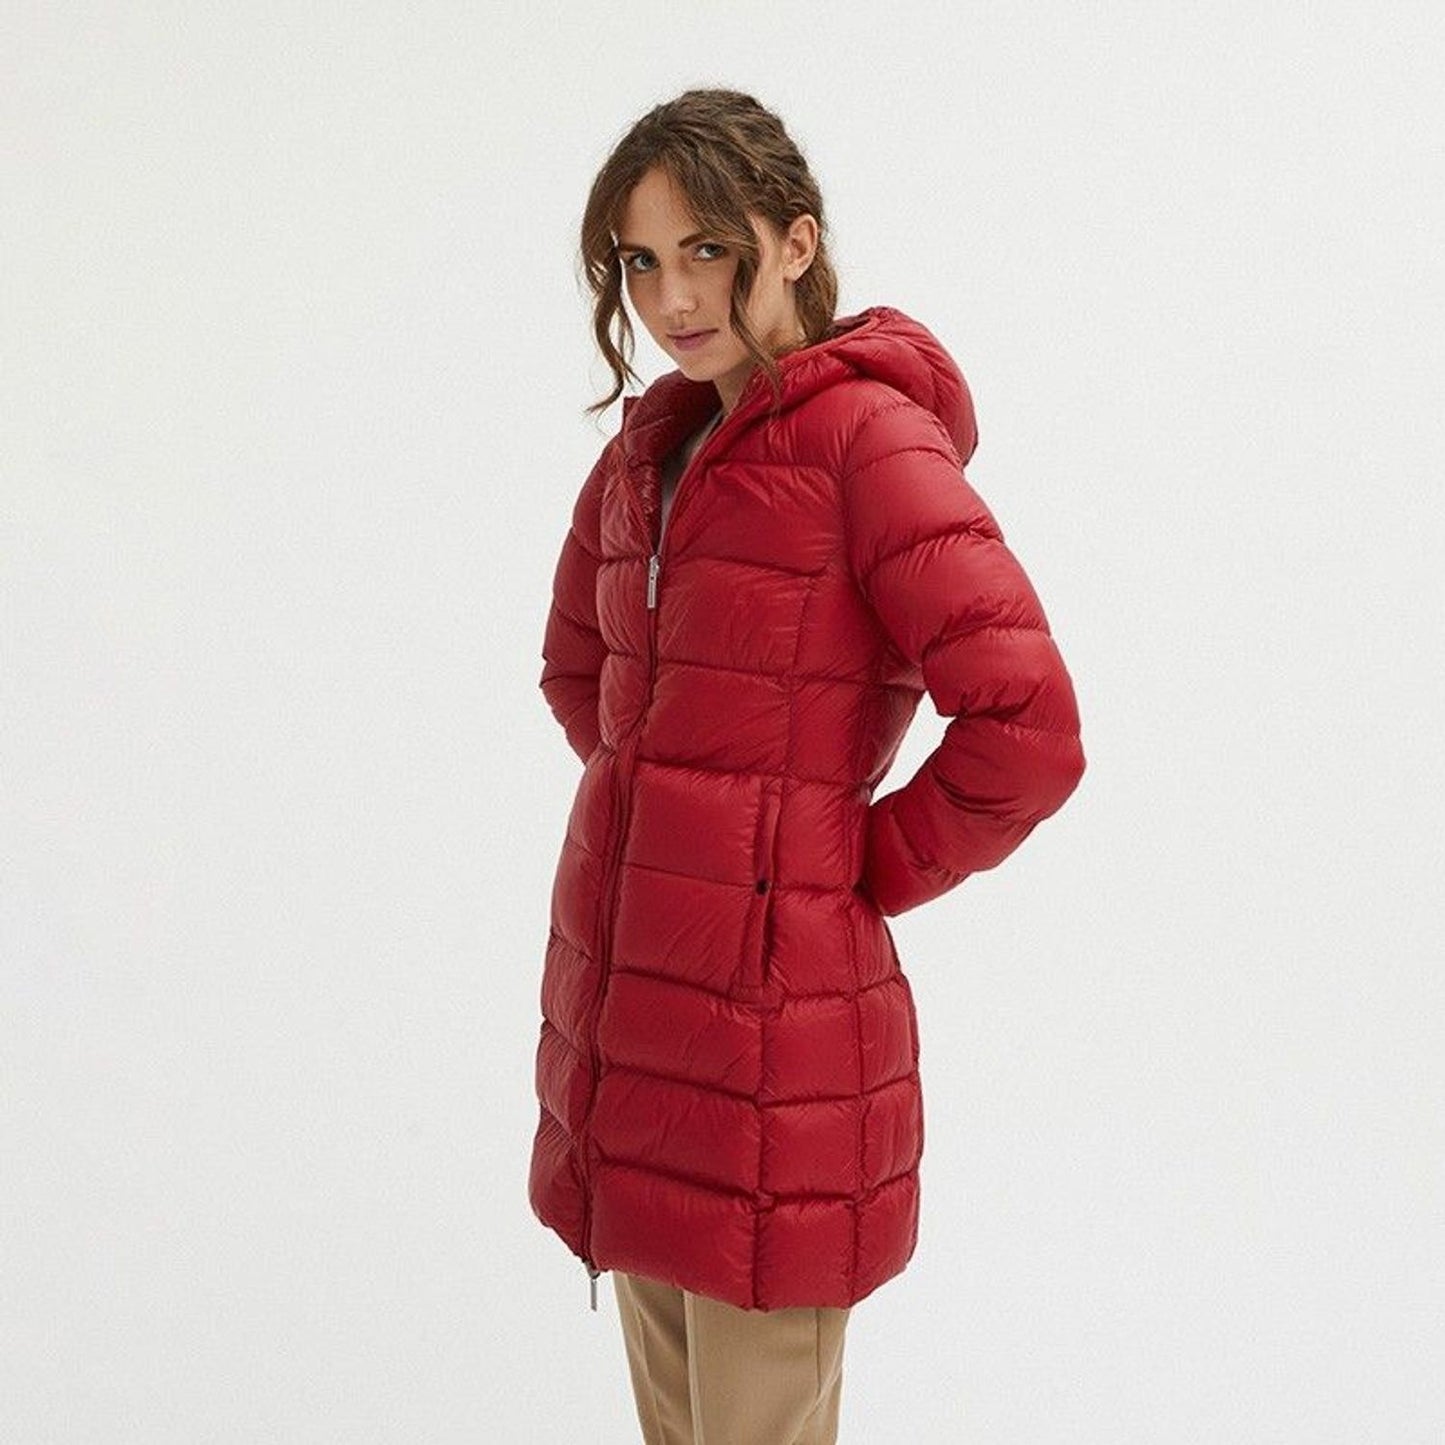 Centogrammi Reversible Goose Down Long Jacket in Pink red-nylon-jackets-coat-3 product-8316-1657688368-10-2bb9237b-3fc.jpg